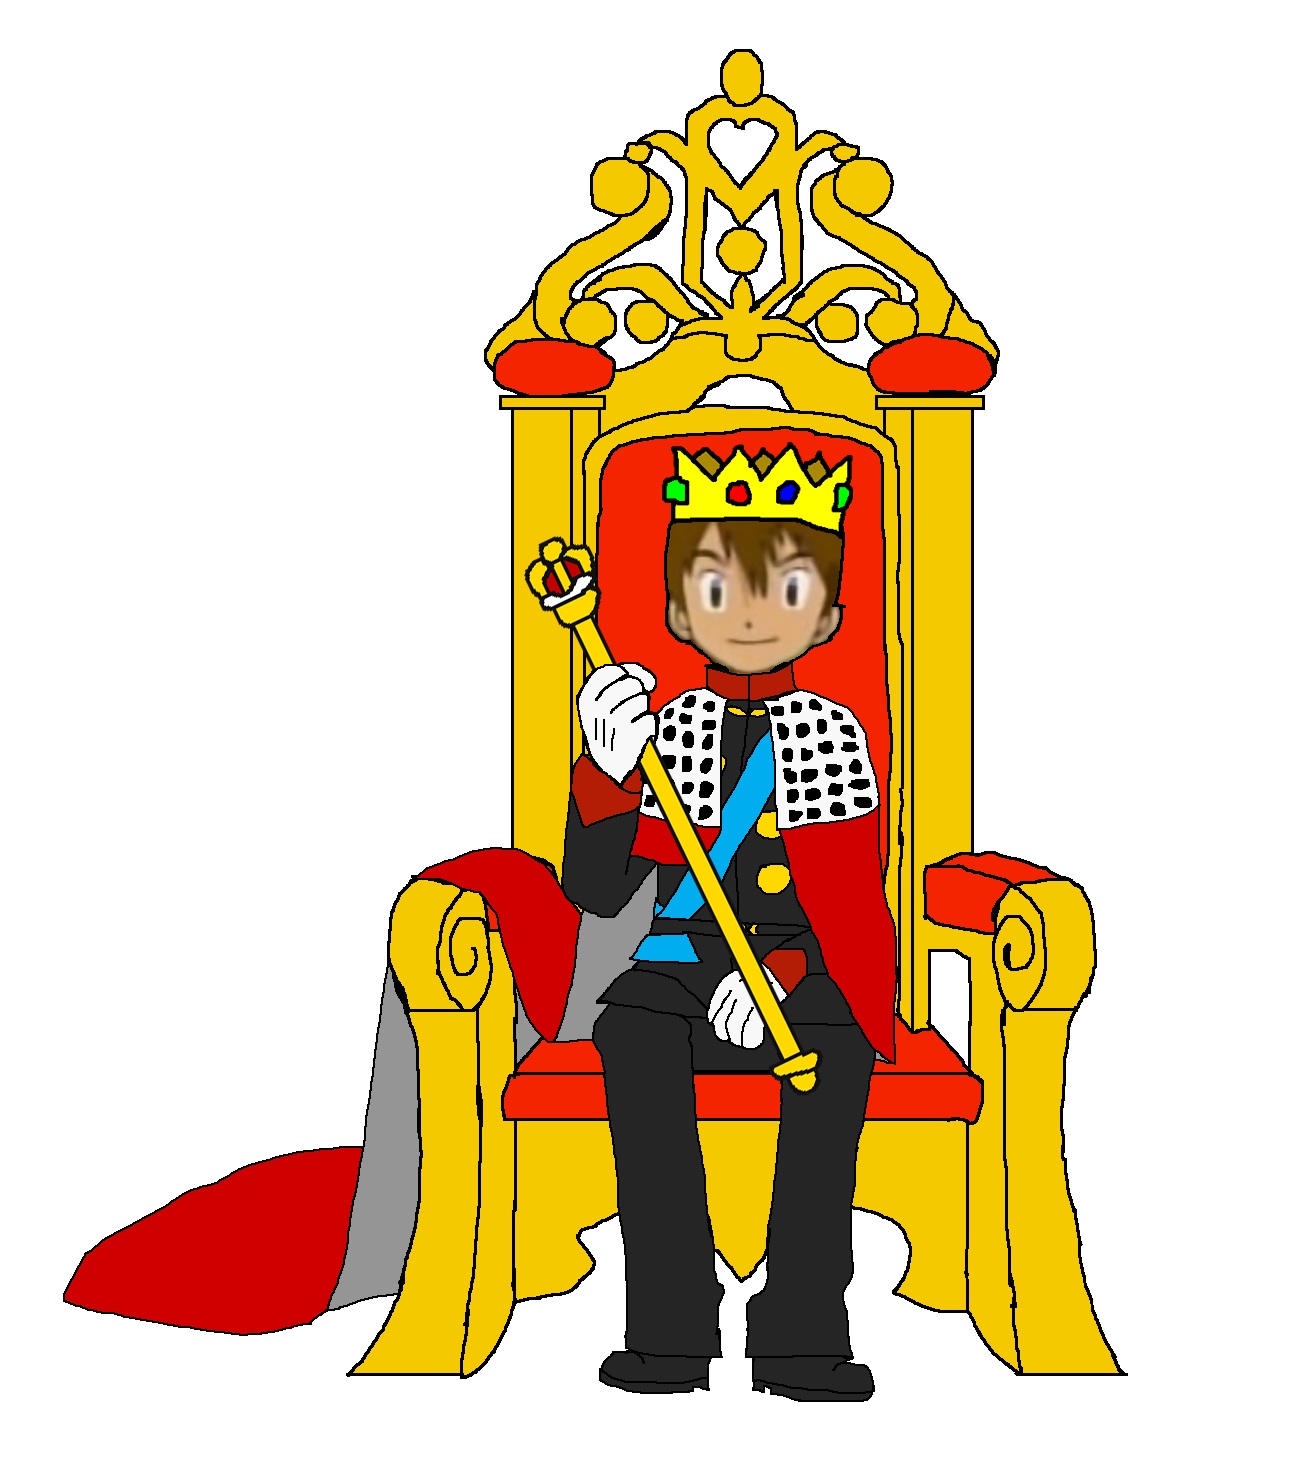 Clip Arts Related To : king sitting on throne drawing. view all Kings Cli.....